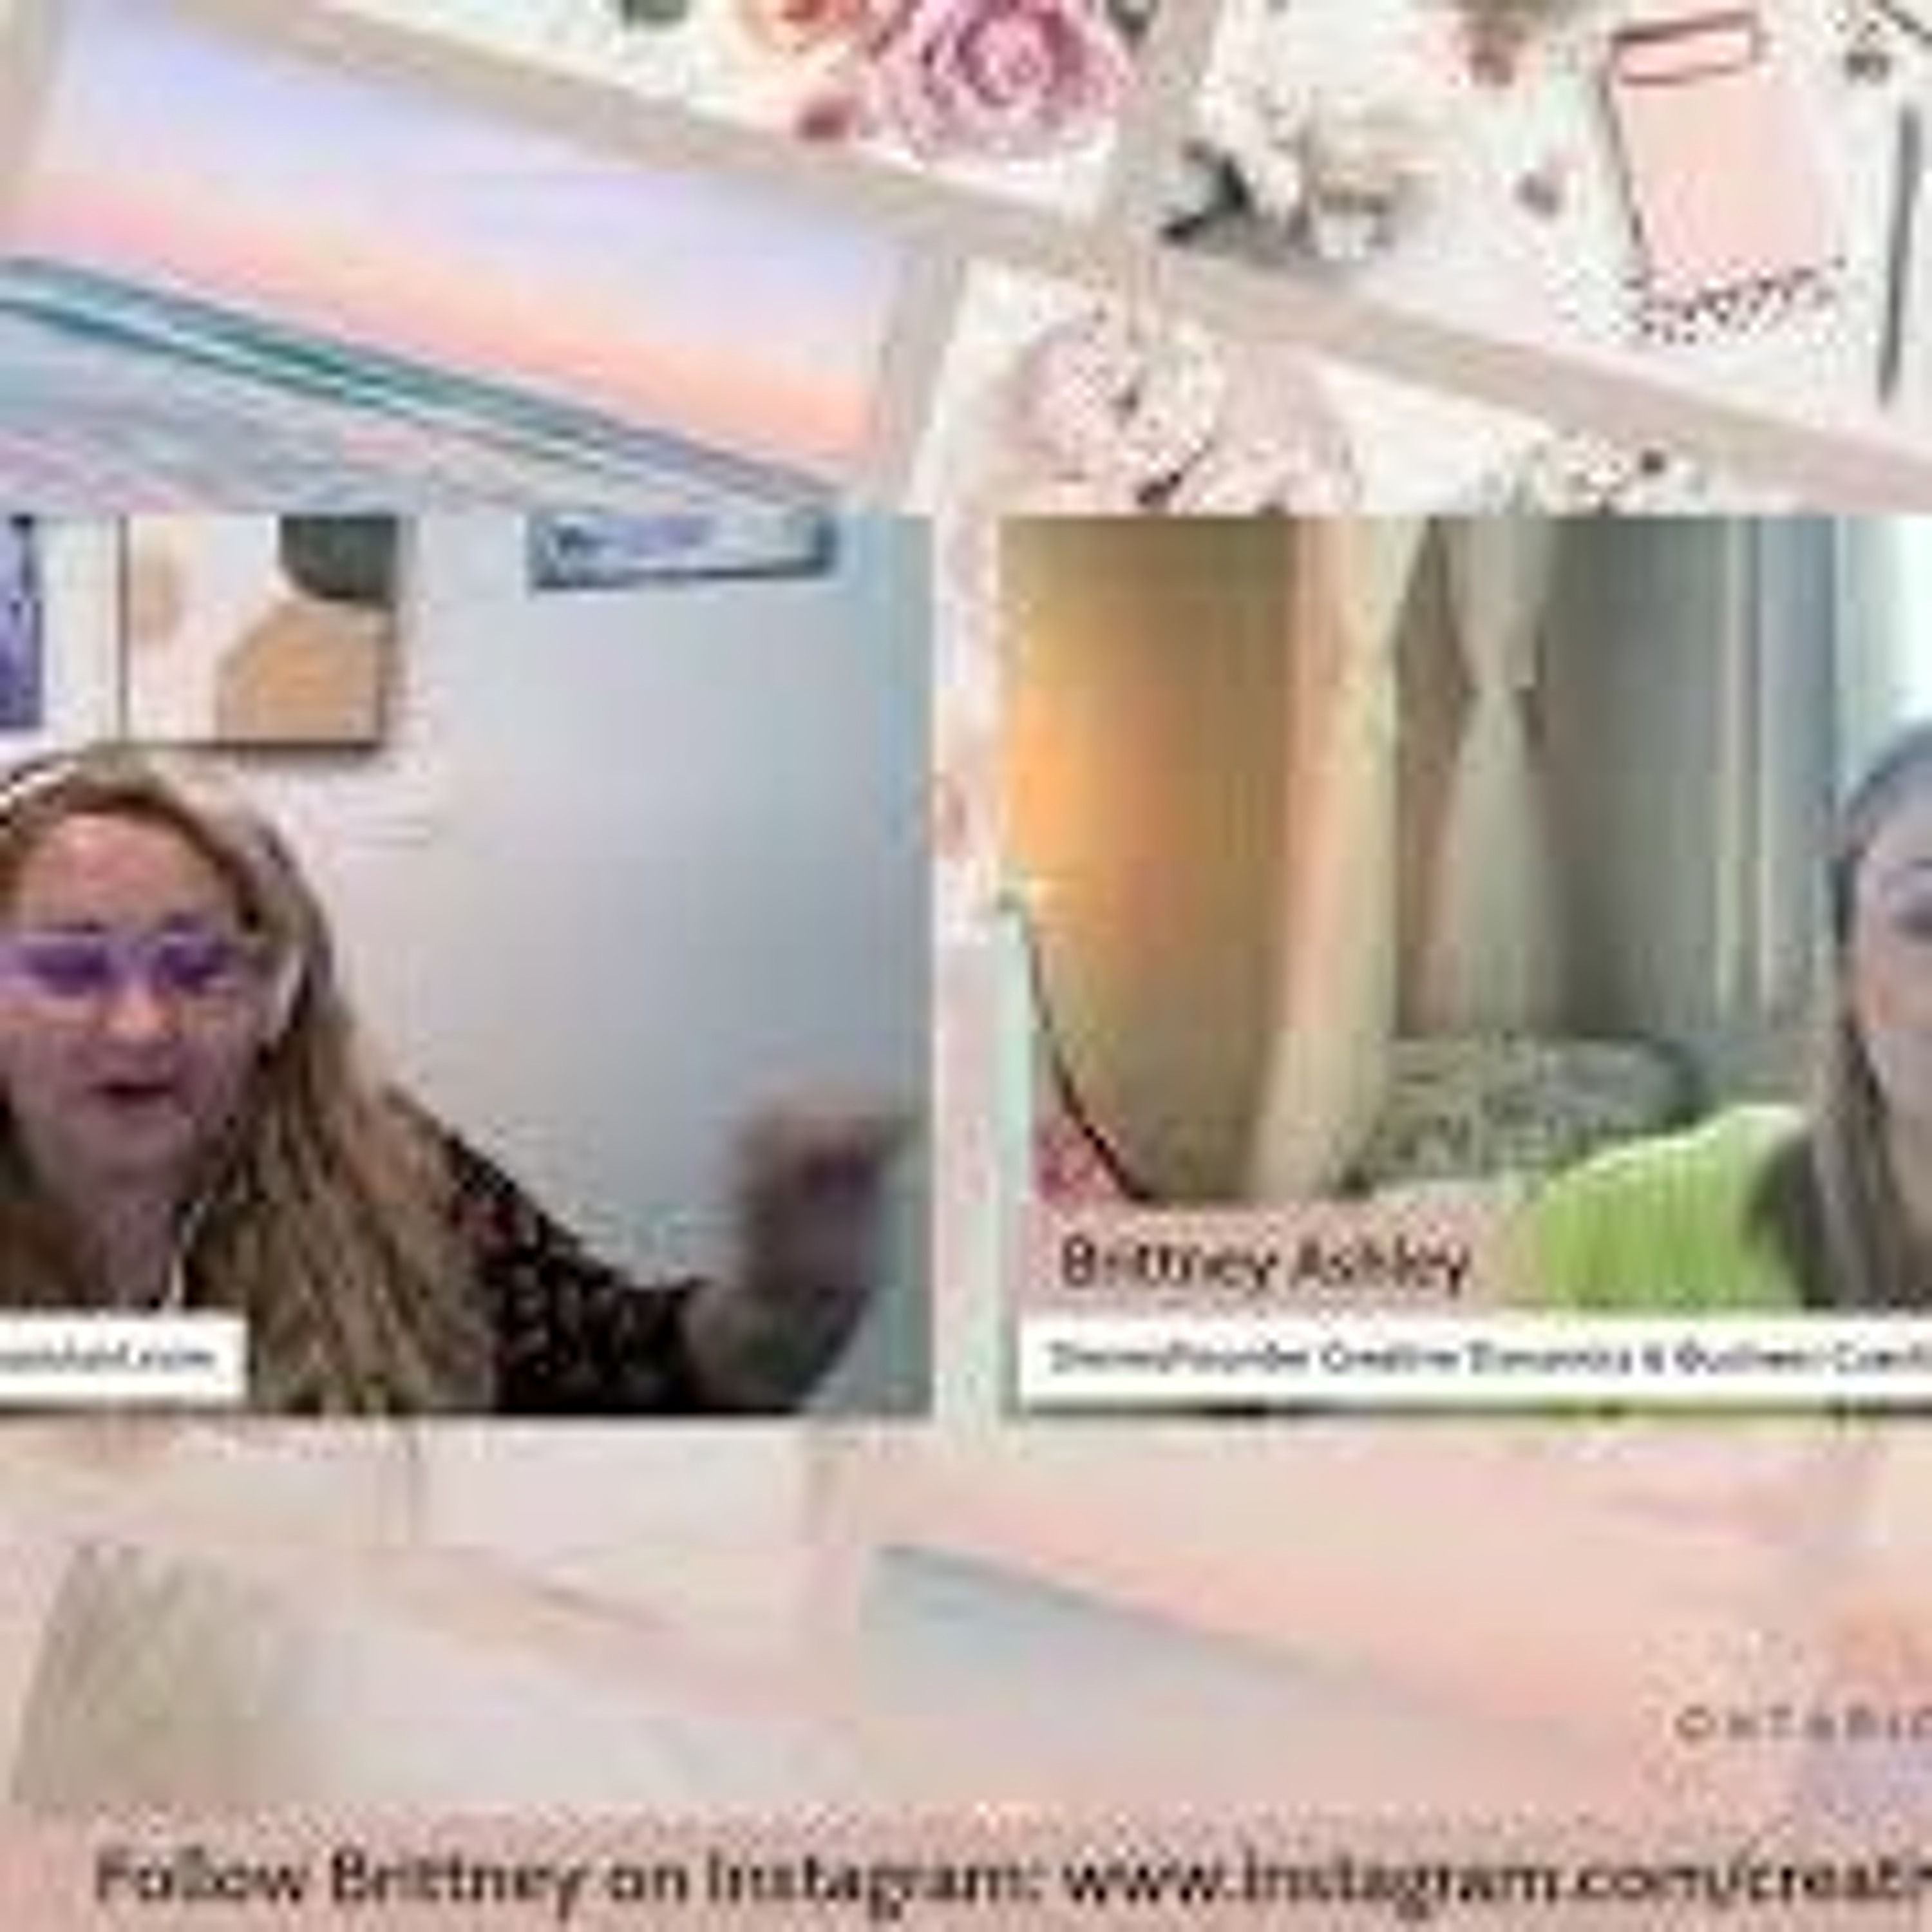 REPLAY  Negotiating Happiness  Ep 24 Brittney Ashley From Creative Dynamics VS